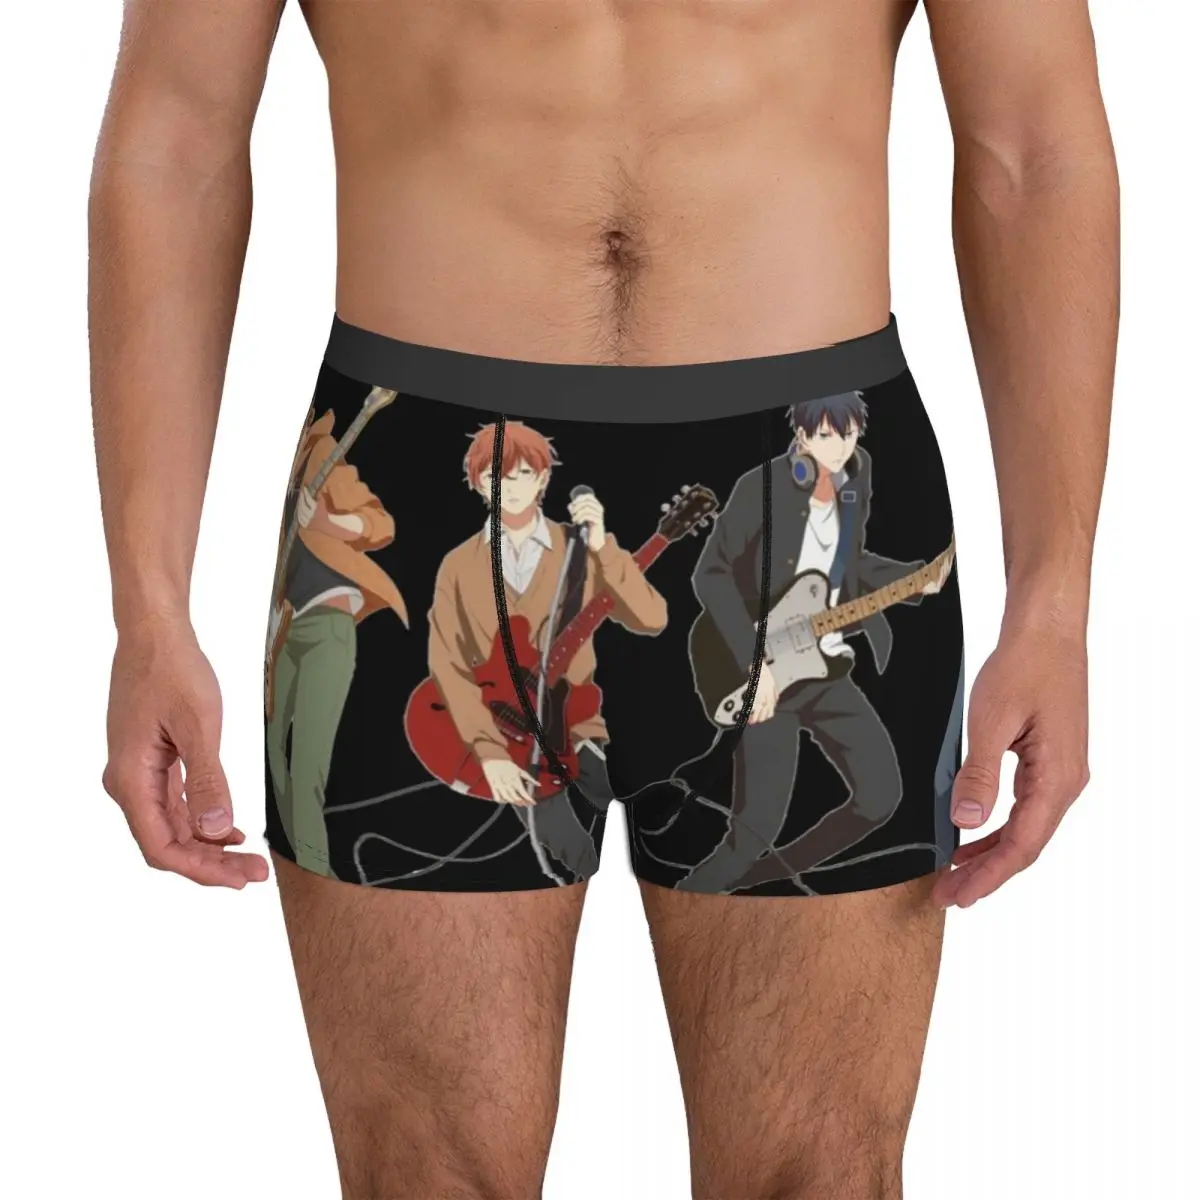 Given Underwear boys love fire force band four guitar anime manga Men Panties Breathable Boxer Shorts High Quality Boxer Brief